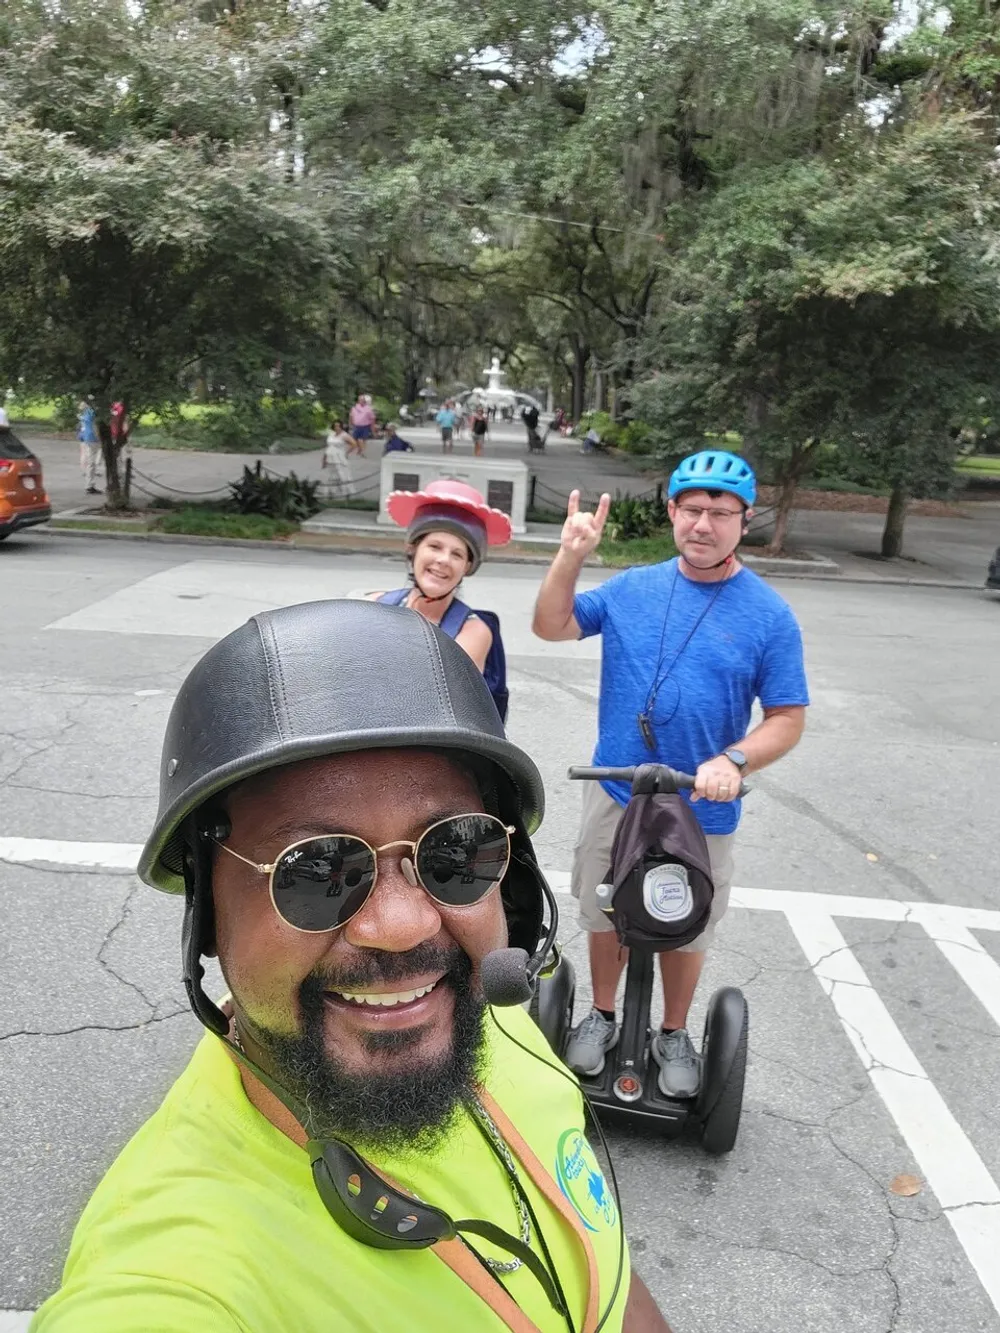 Three individuals are posing for a selfie on a sunny day with two of them standing behind on Segways and the person in the foreground wearing a helmet and sunglasses giving a thumbs-up sign